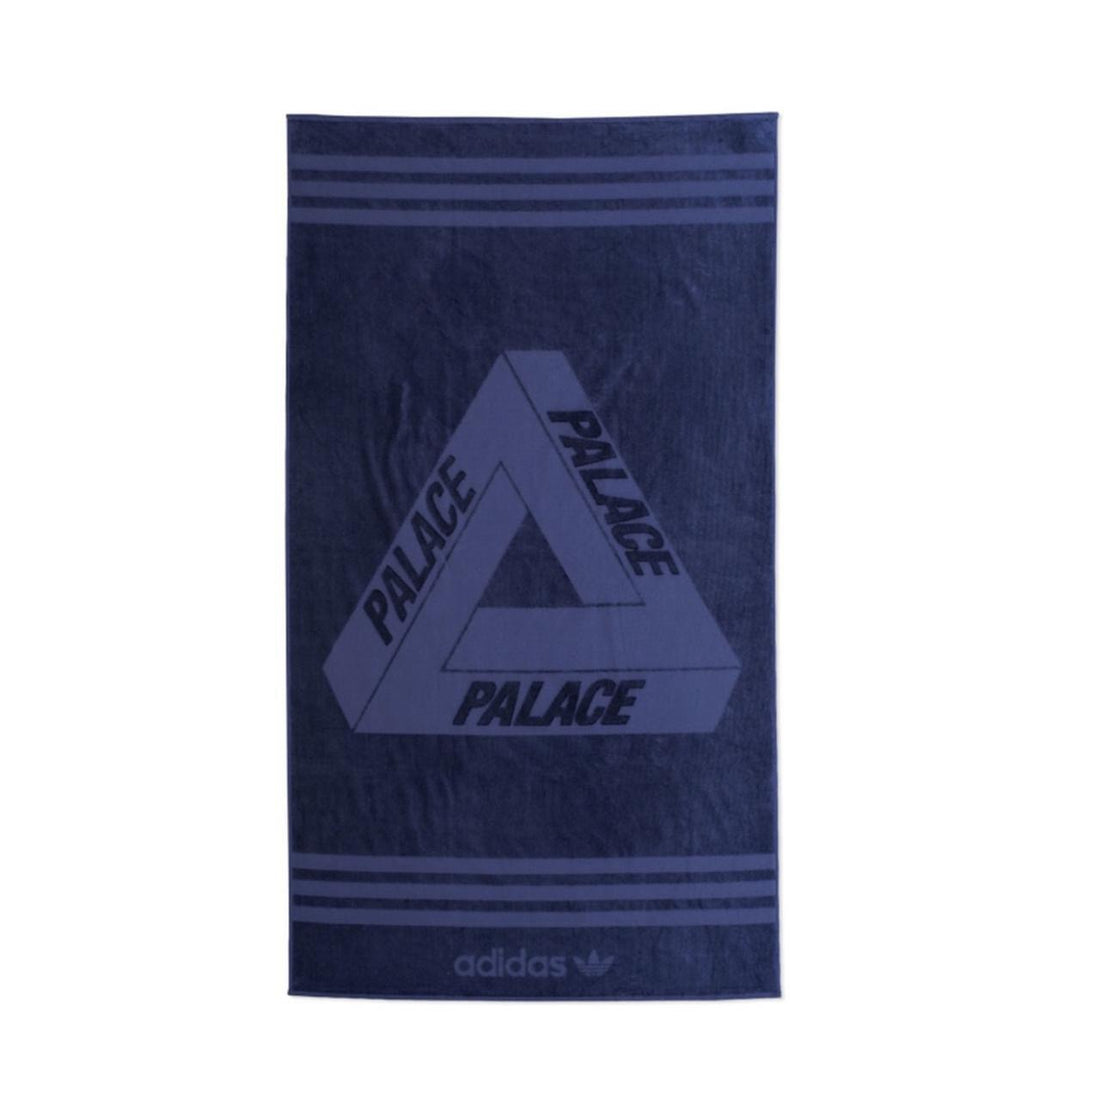 Palace Adidas Terry full size towel